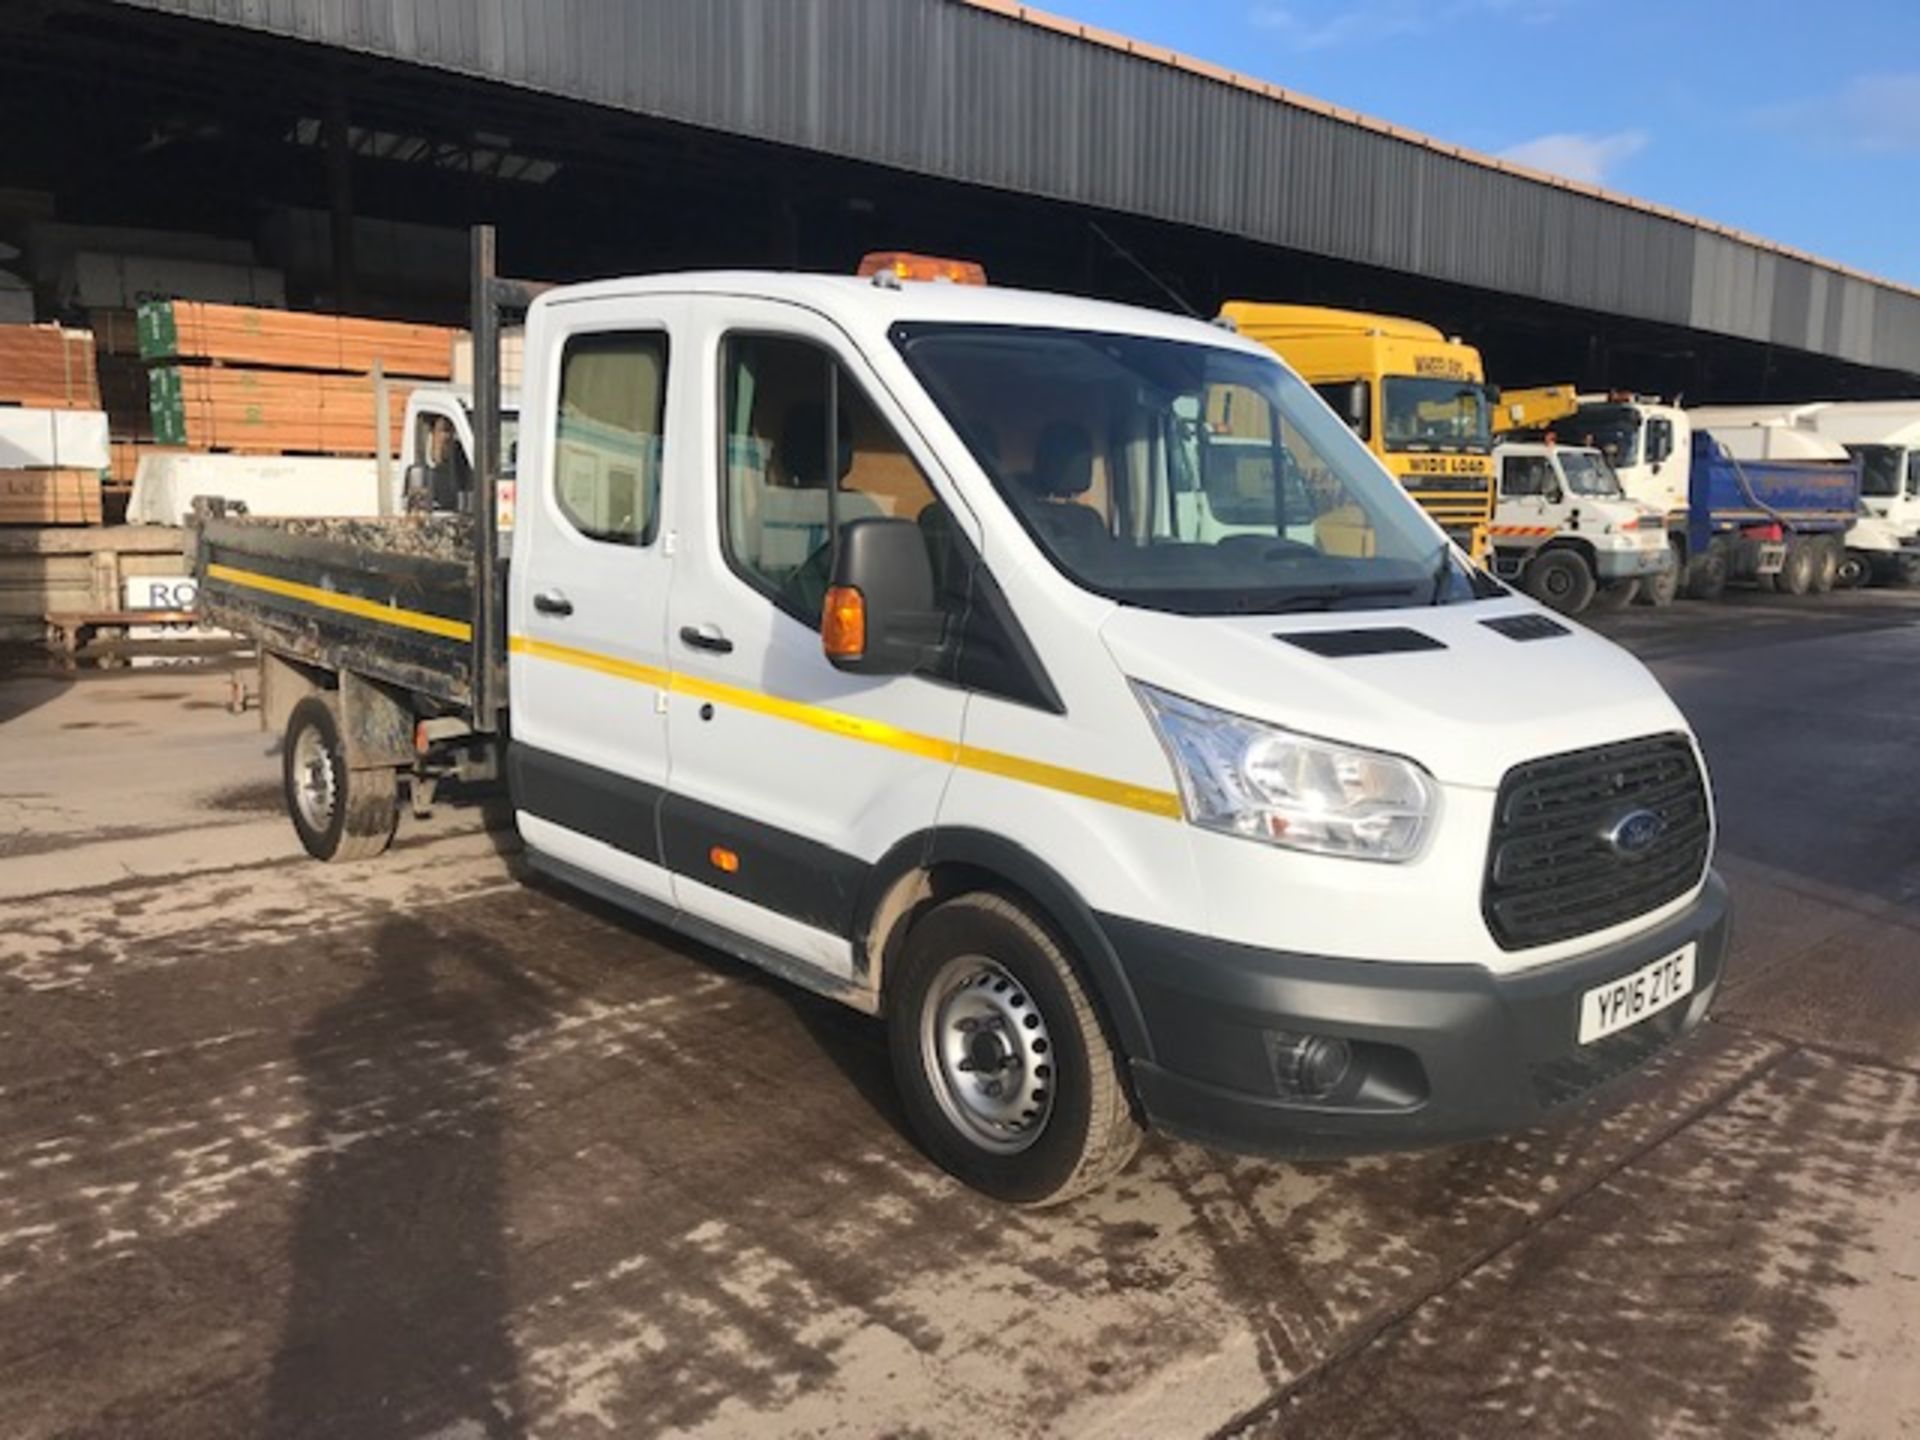 2016 Ford Transit 350 Double cab Tipper - Image 3 of 11